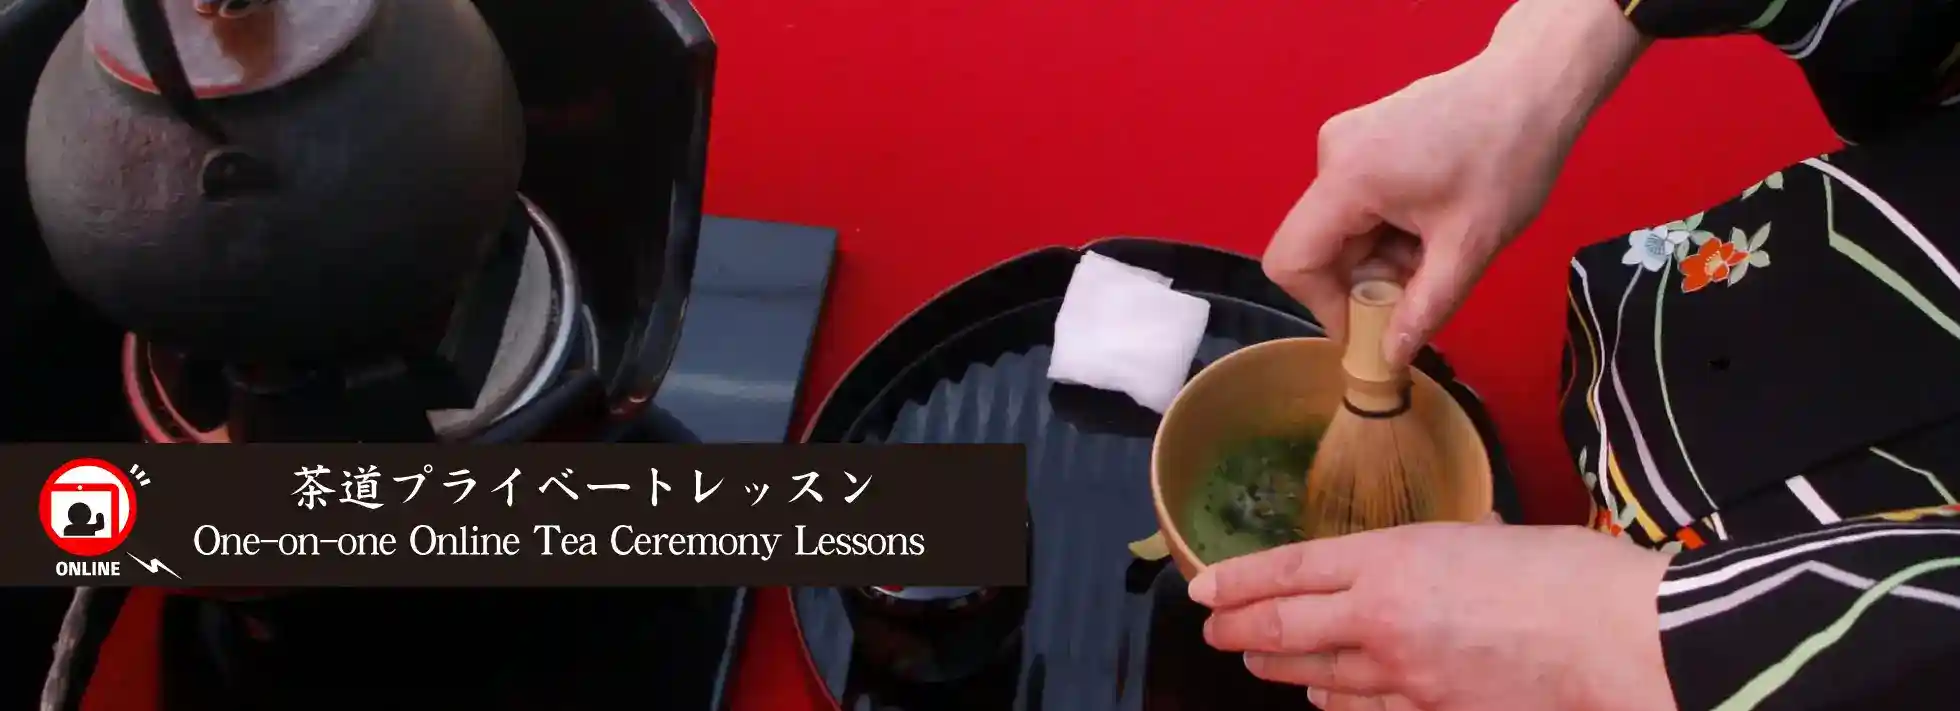 One-on-one Online Tea Ceremony Lessons